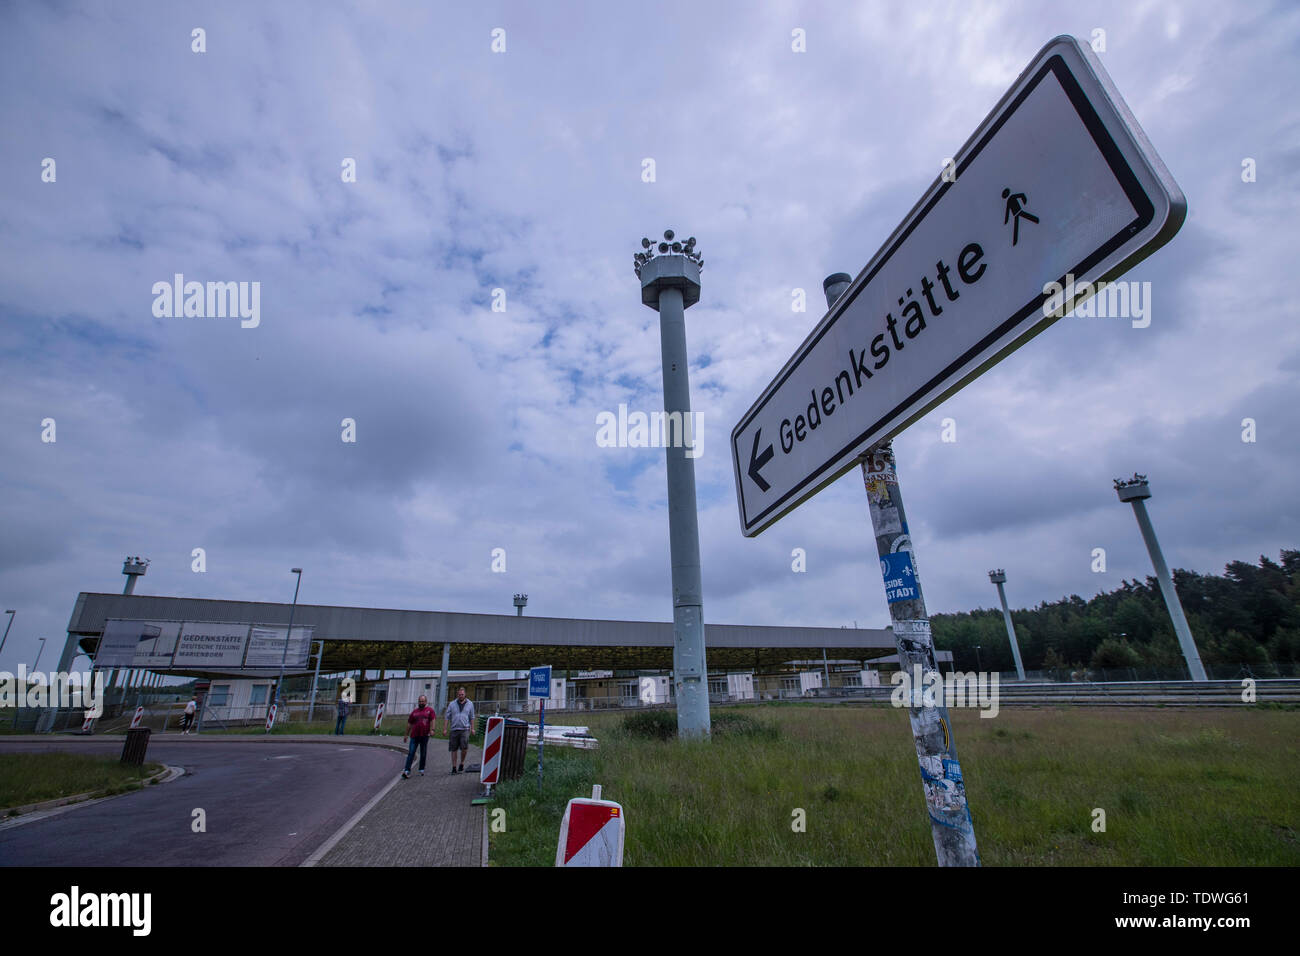 Marienborn, Germany. 31st May, 2019. A guide to the German Partition Memorial Marienborn. The former border crossing point was the largest and most important checkpoint on the German-German border and was mainly used for transit traffic to West Berlin. Opened in 1974 and covering 10,000 square metres, the covered checkpoints of the former truck, car, veterinary and customs checkpoints are now part of the memorial site. Credit: Jens Büttner/dpa-Zentralbild/ZB/dpa/Alamy Live News Stock Photo